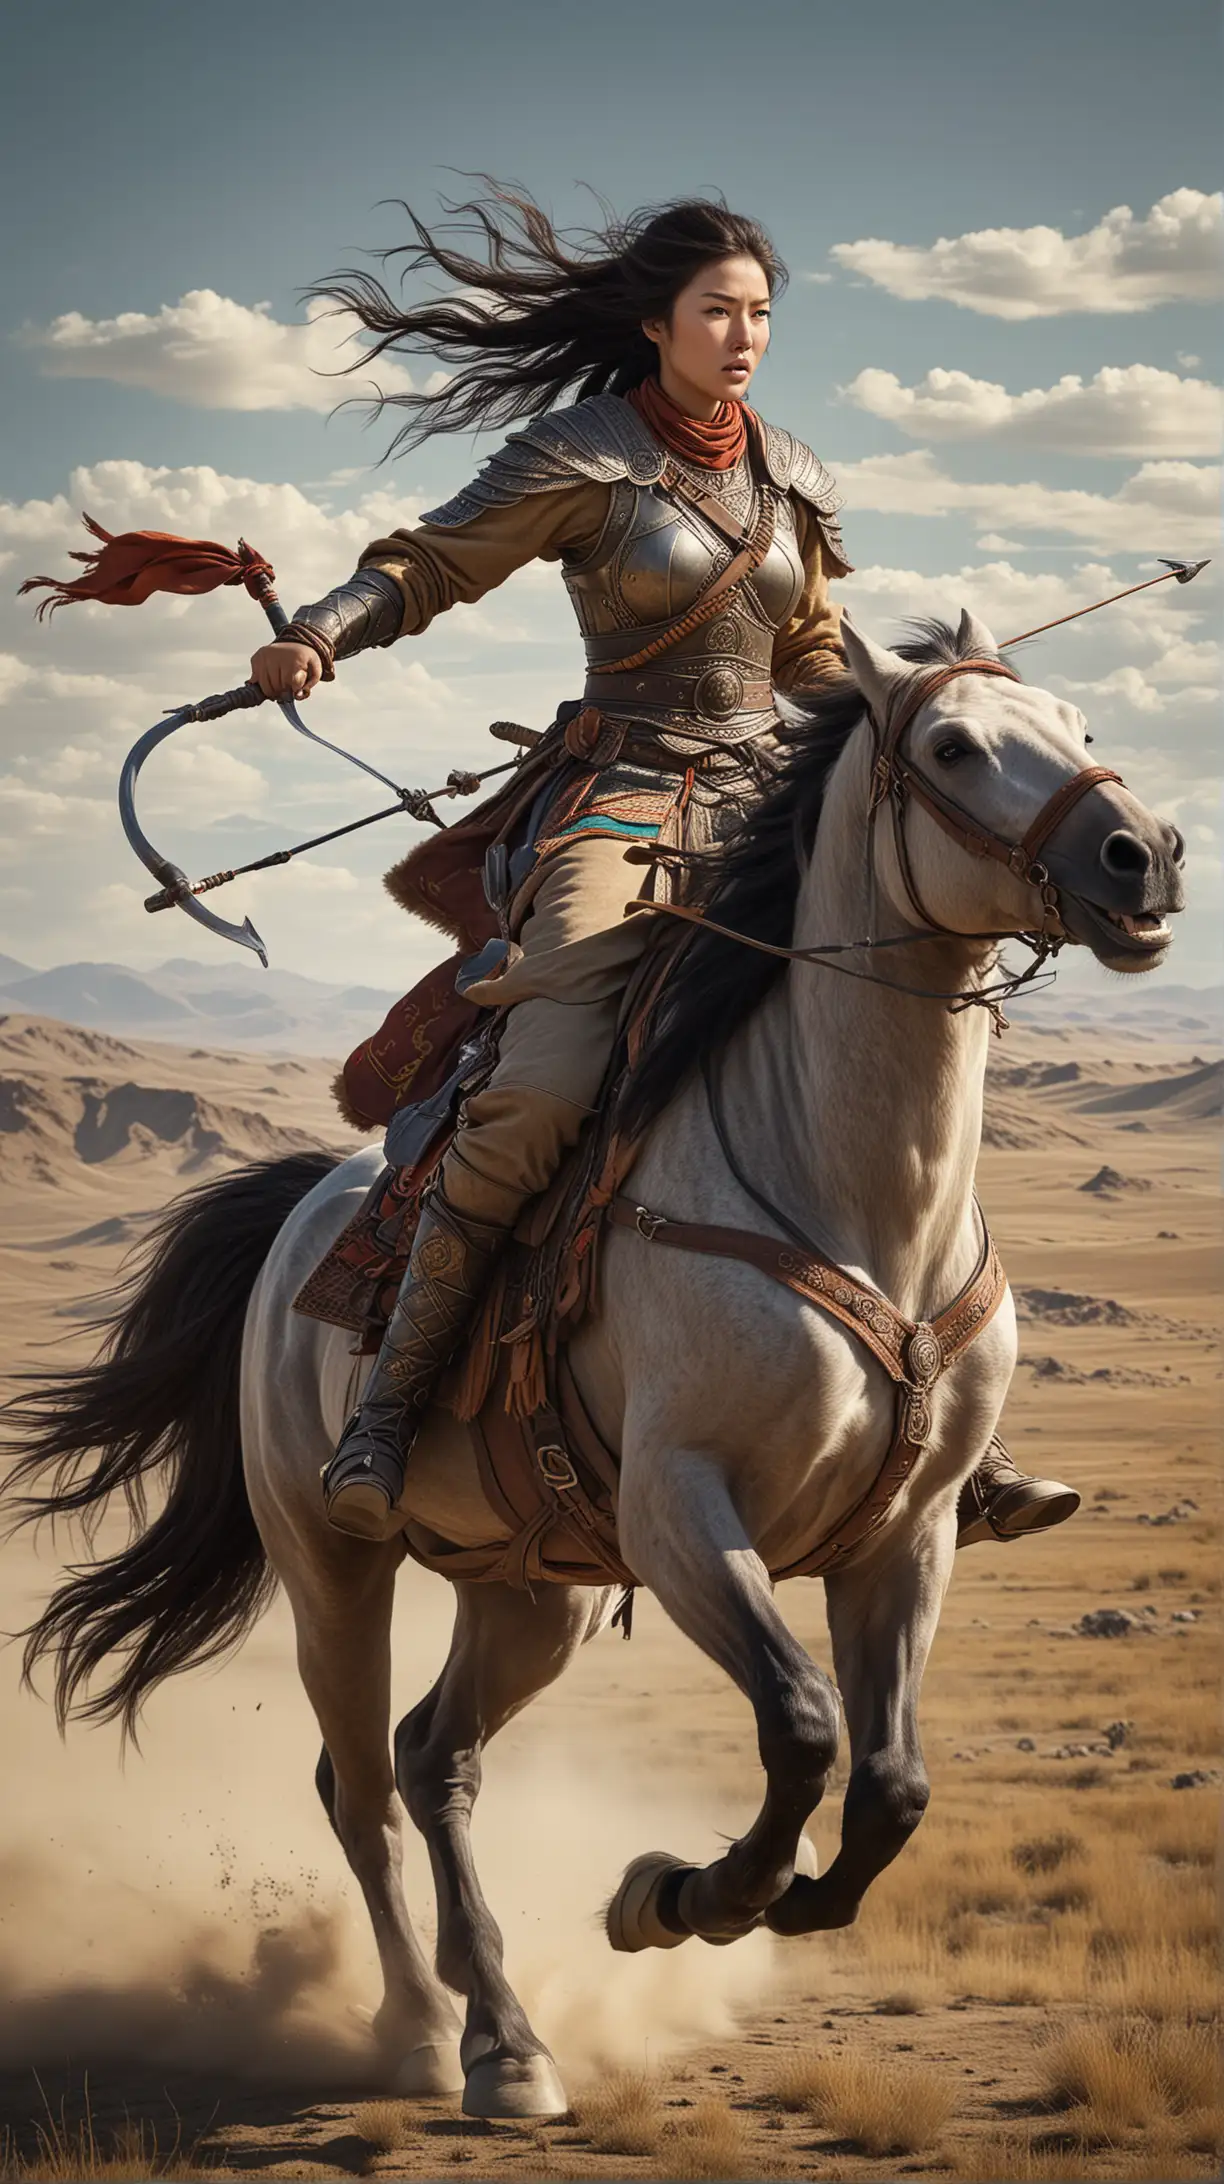 Generate an image of a Mongol Empire warrior woman astride a powerful steed, her bow at the ready as she gallops across the vast steppes of Central Asia, her hair streaming behind her in the wind. hyper realistic